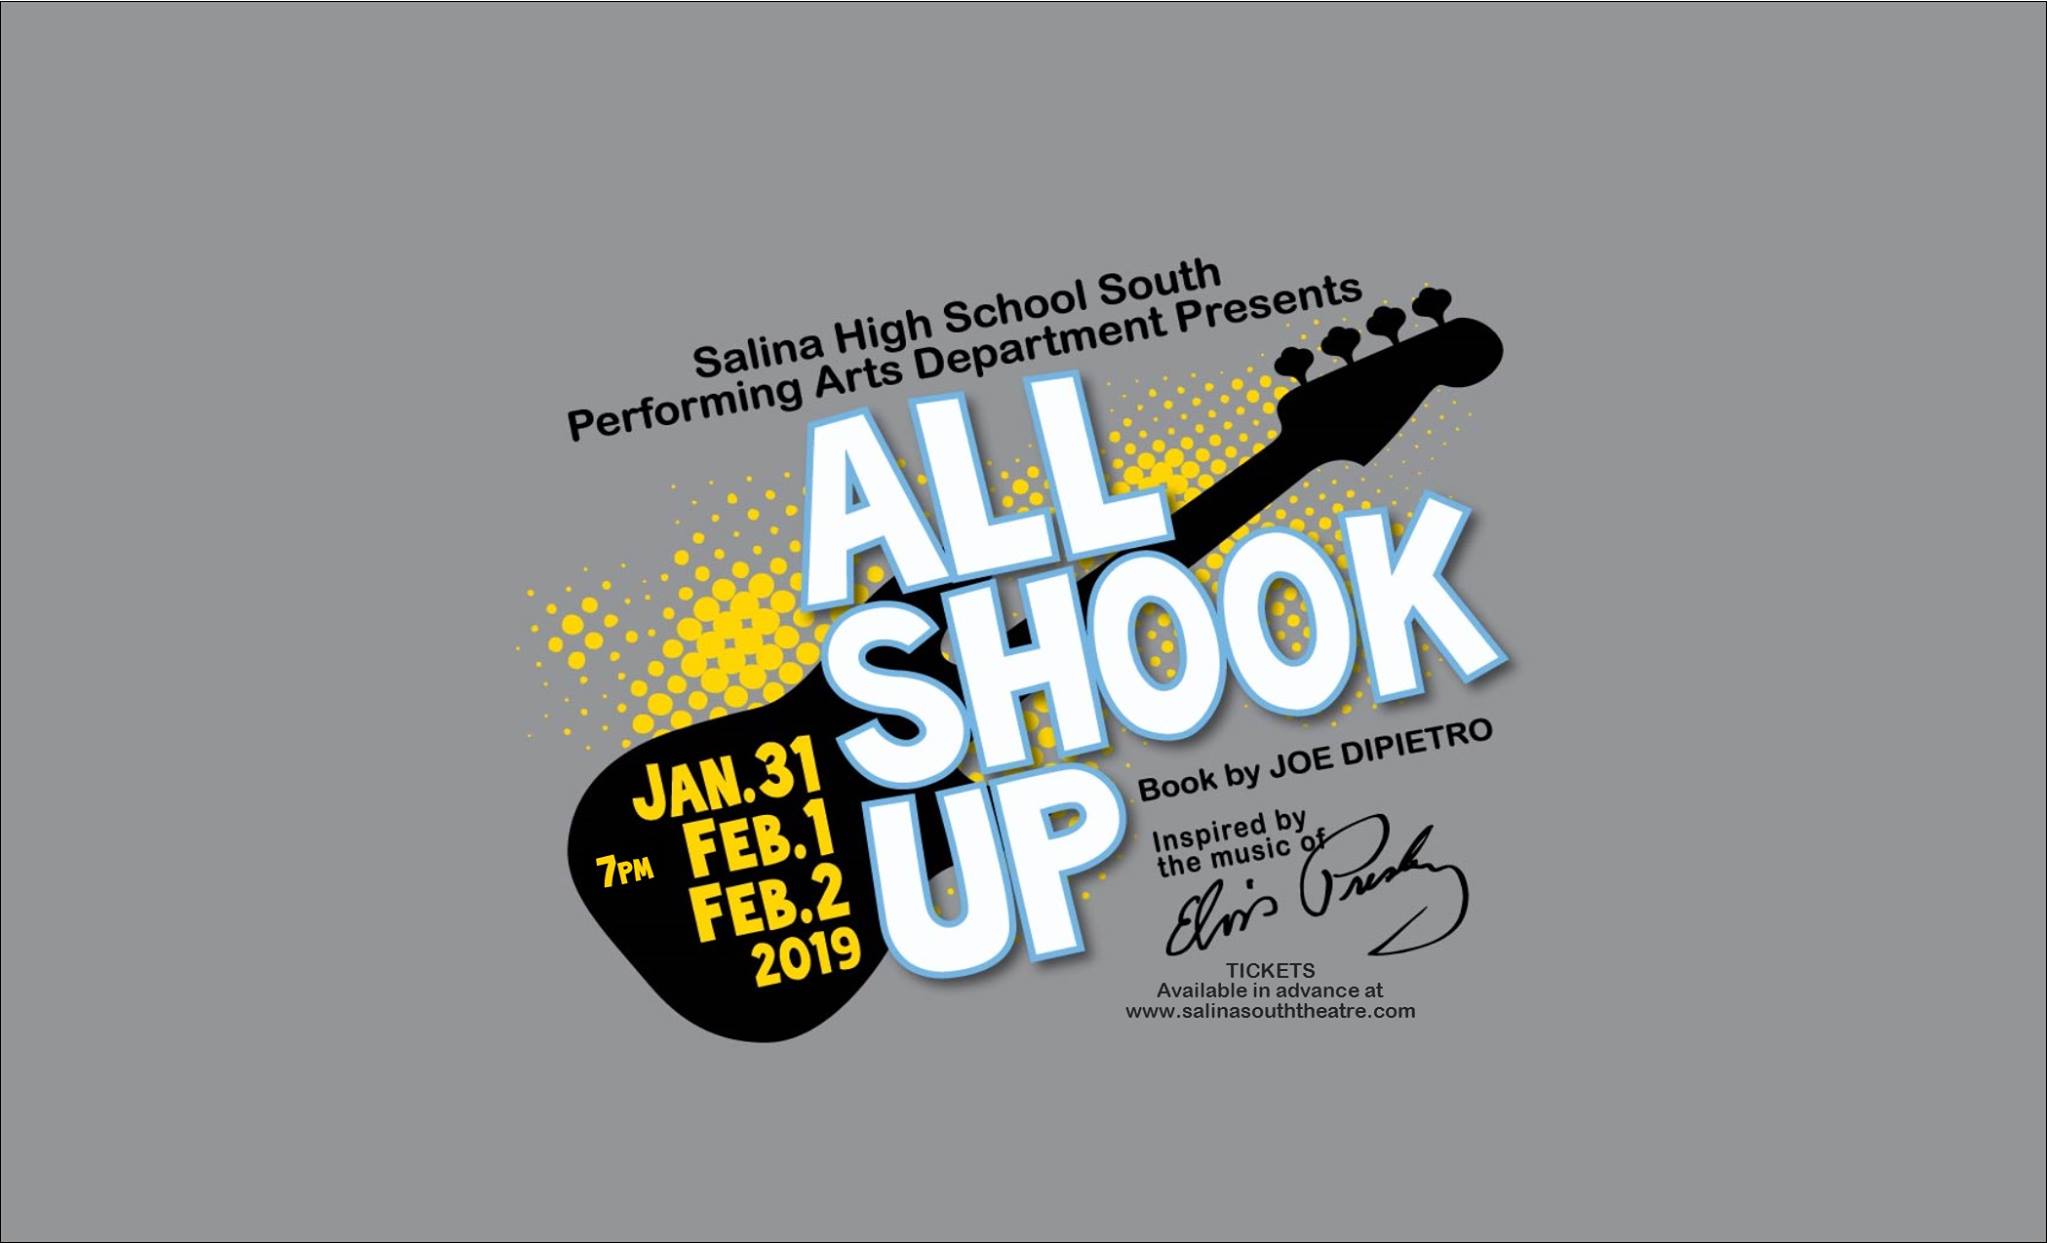 South Presents All Shook Up